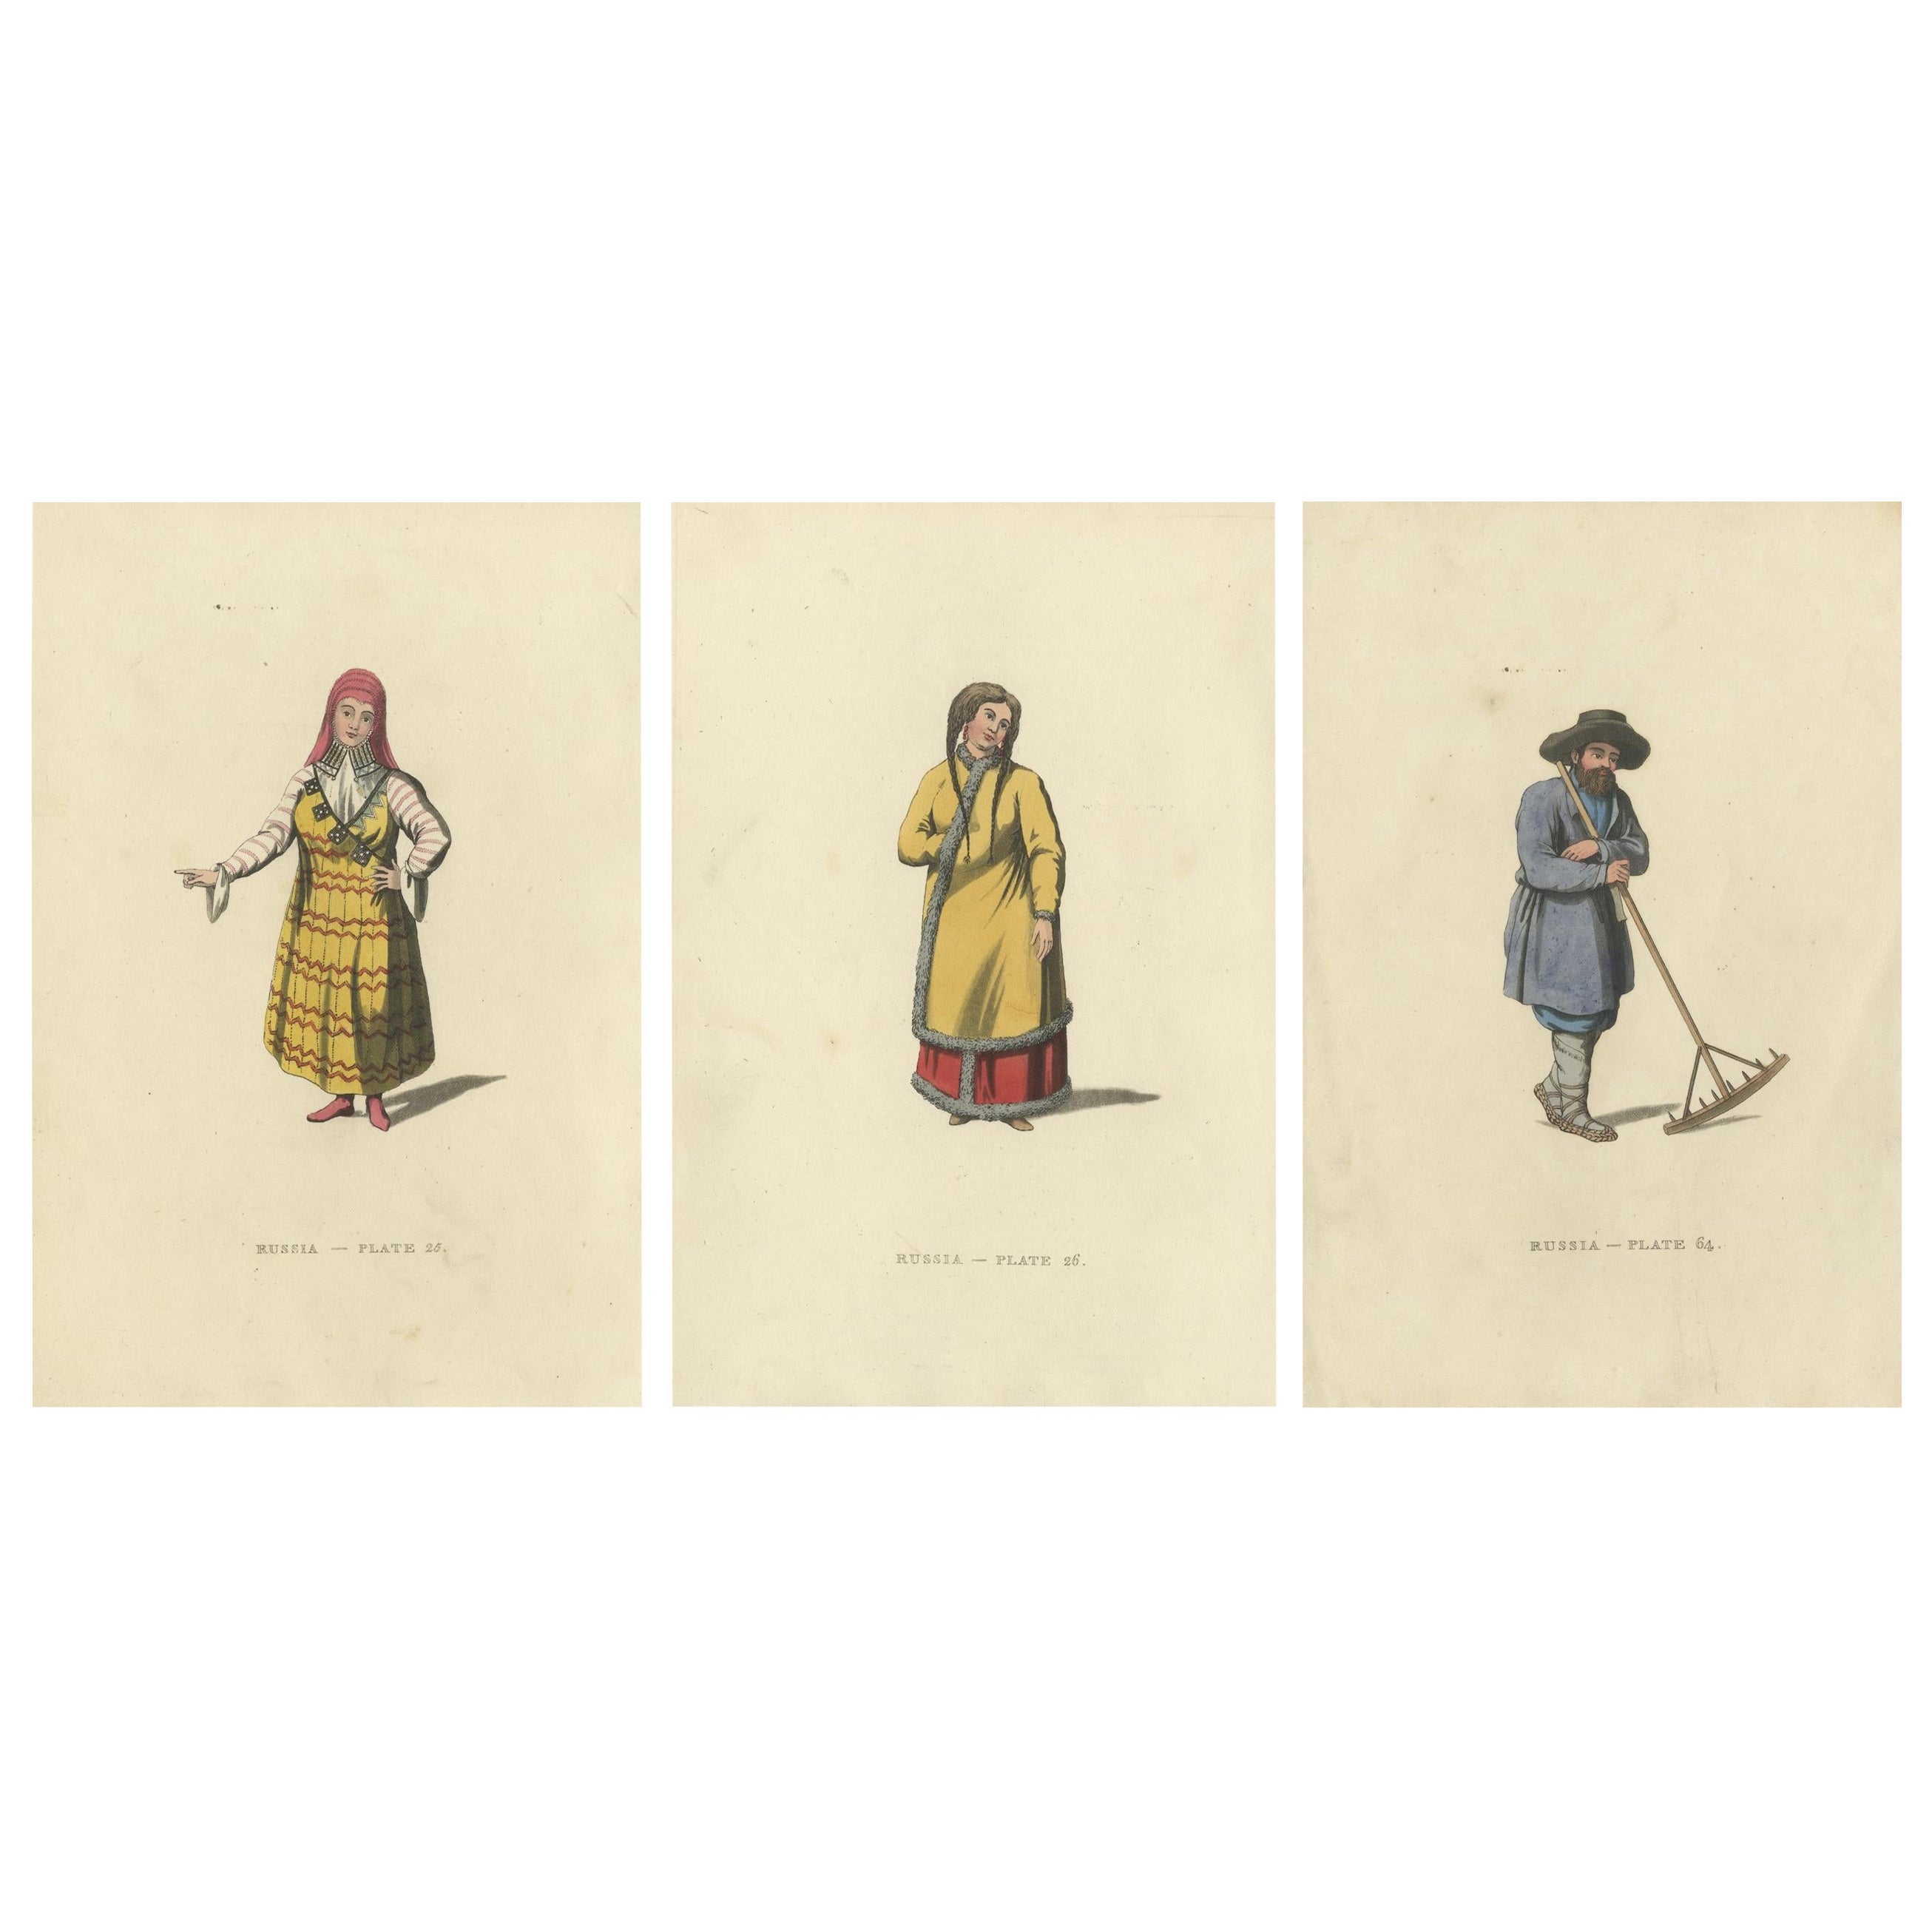 Traditional Attires of Early 19th Century Russia: A Visual Record in Engravings